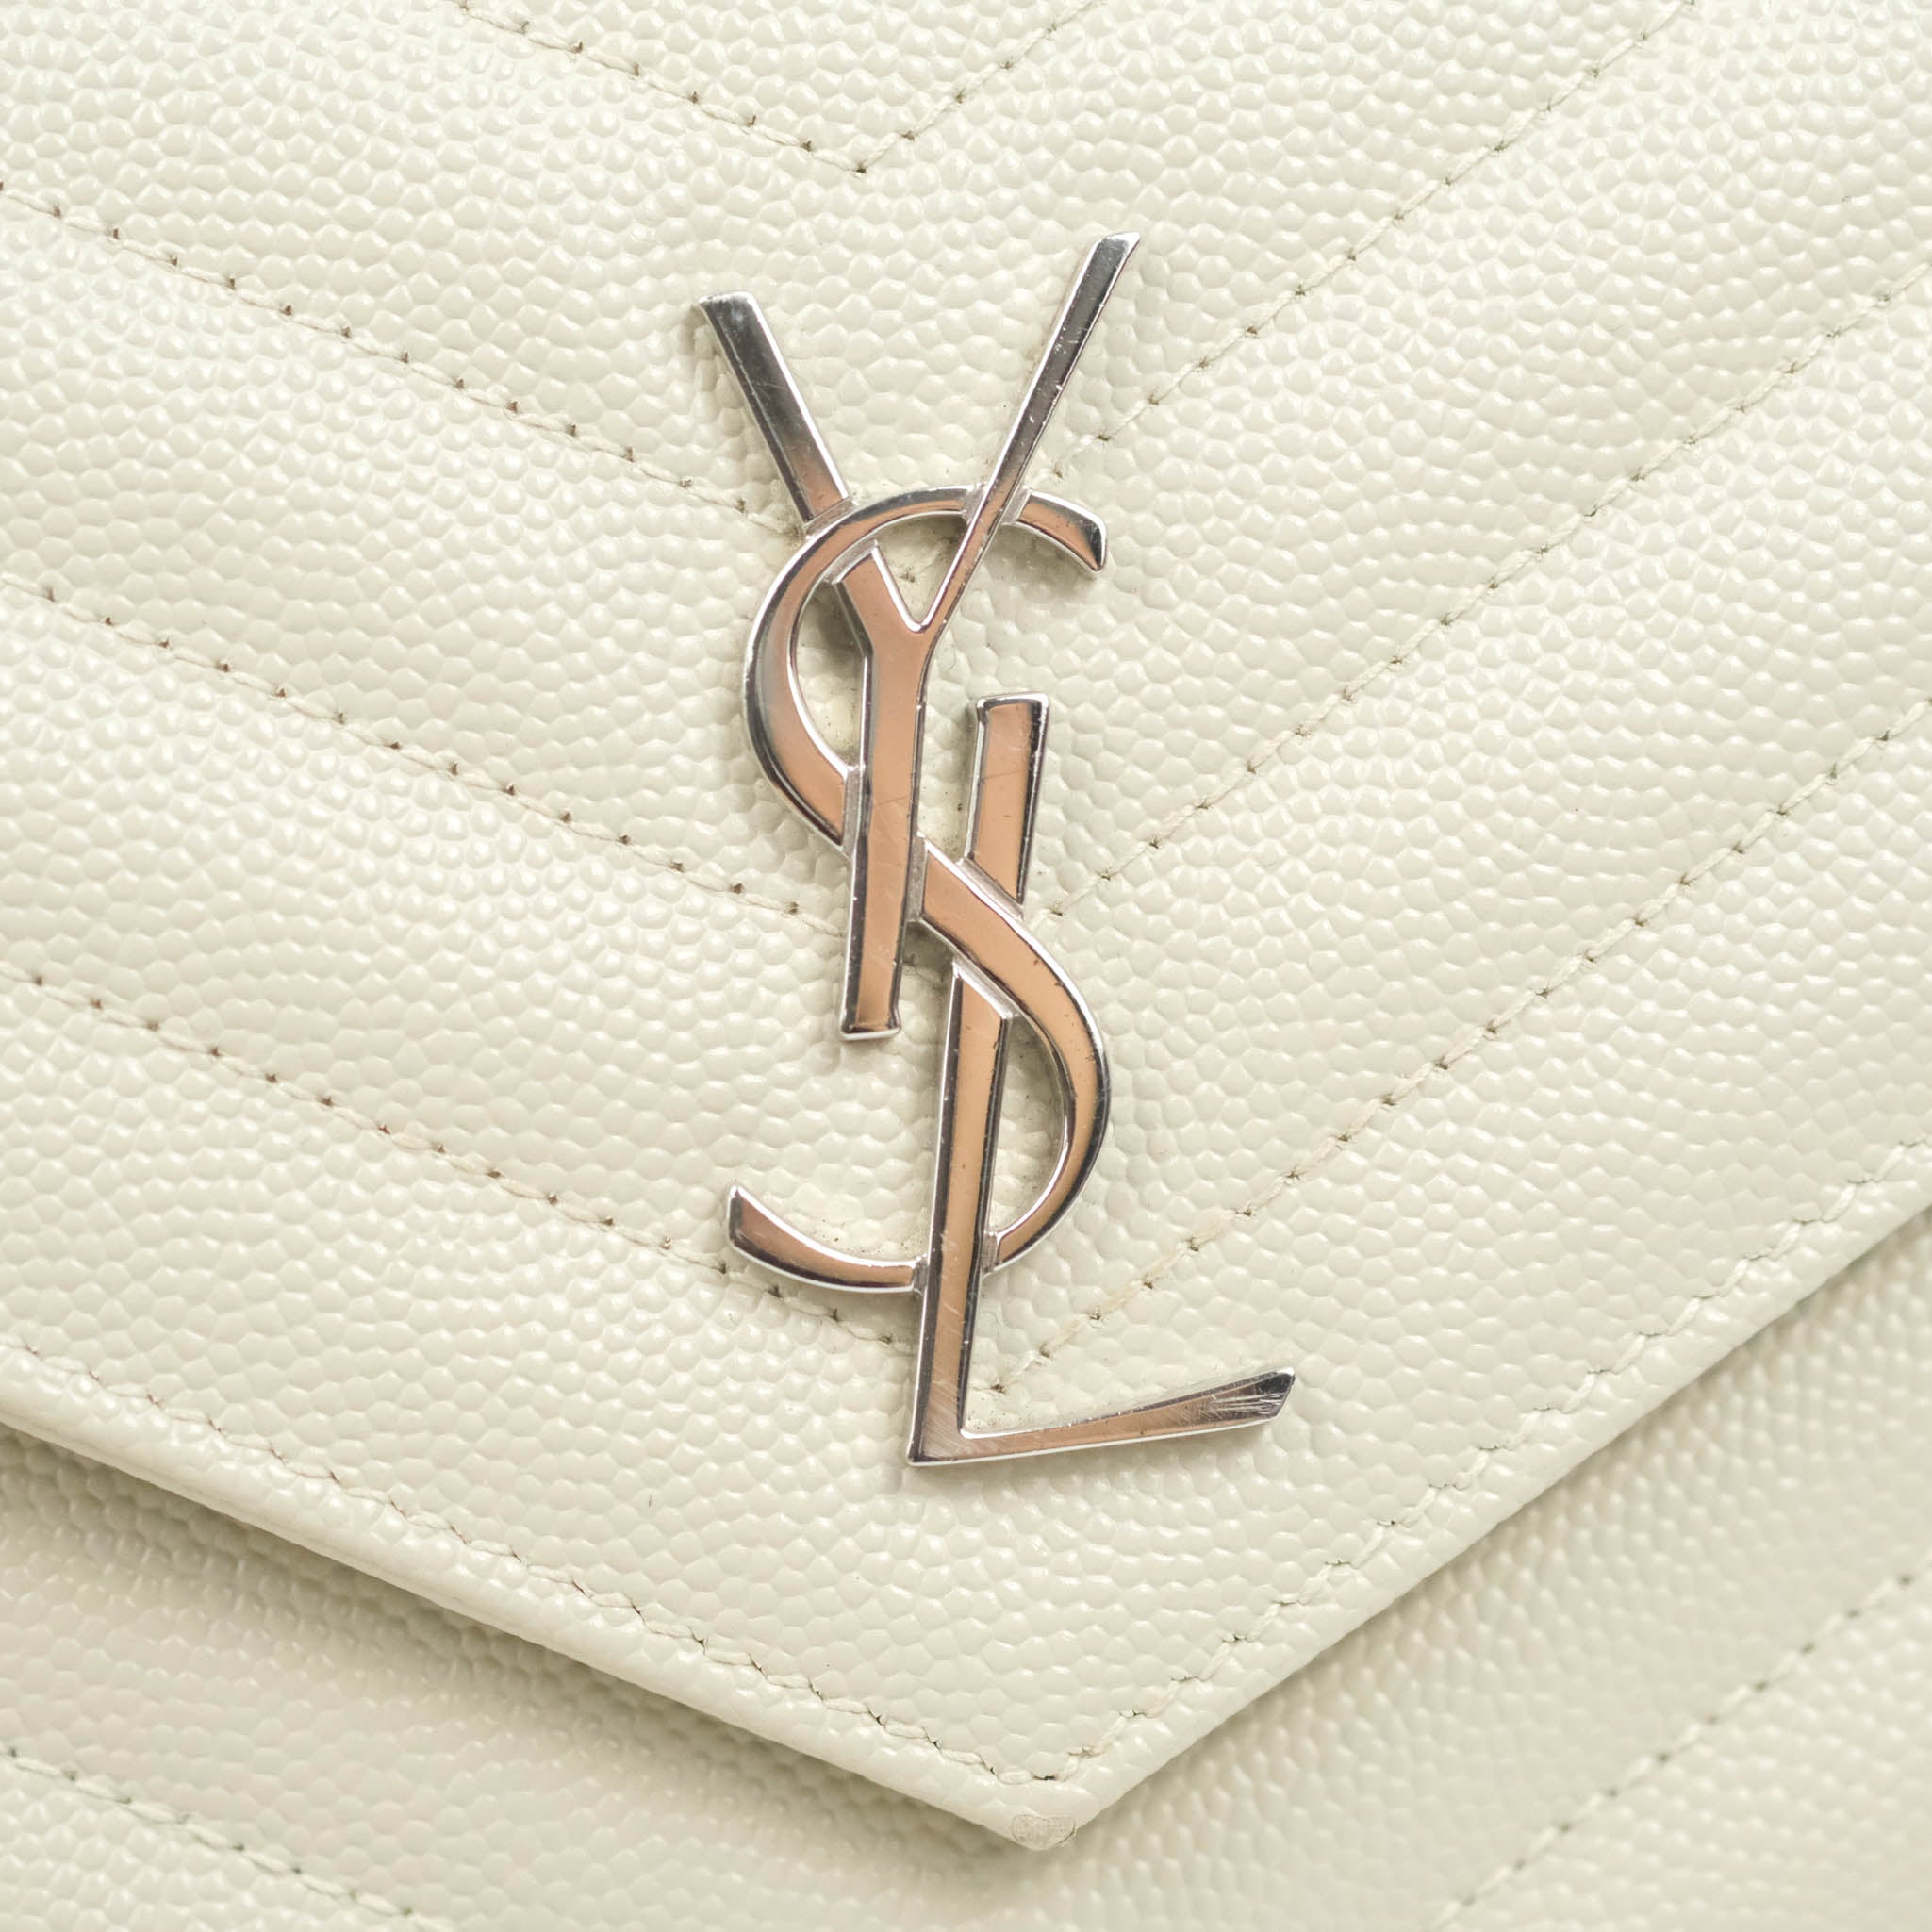 Saint Laurent White Grained Leather Kate Wallet on Chain at 1stDibs  saint  laurent grained leather wallet, white ysl bag silver chain, white ysl bag  with silver chain